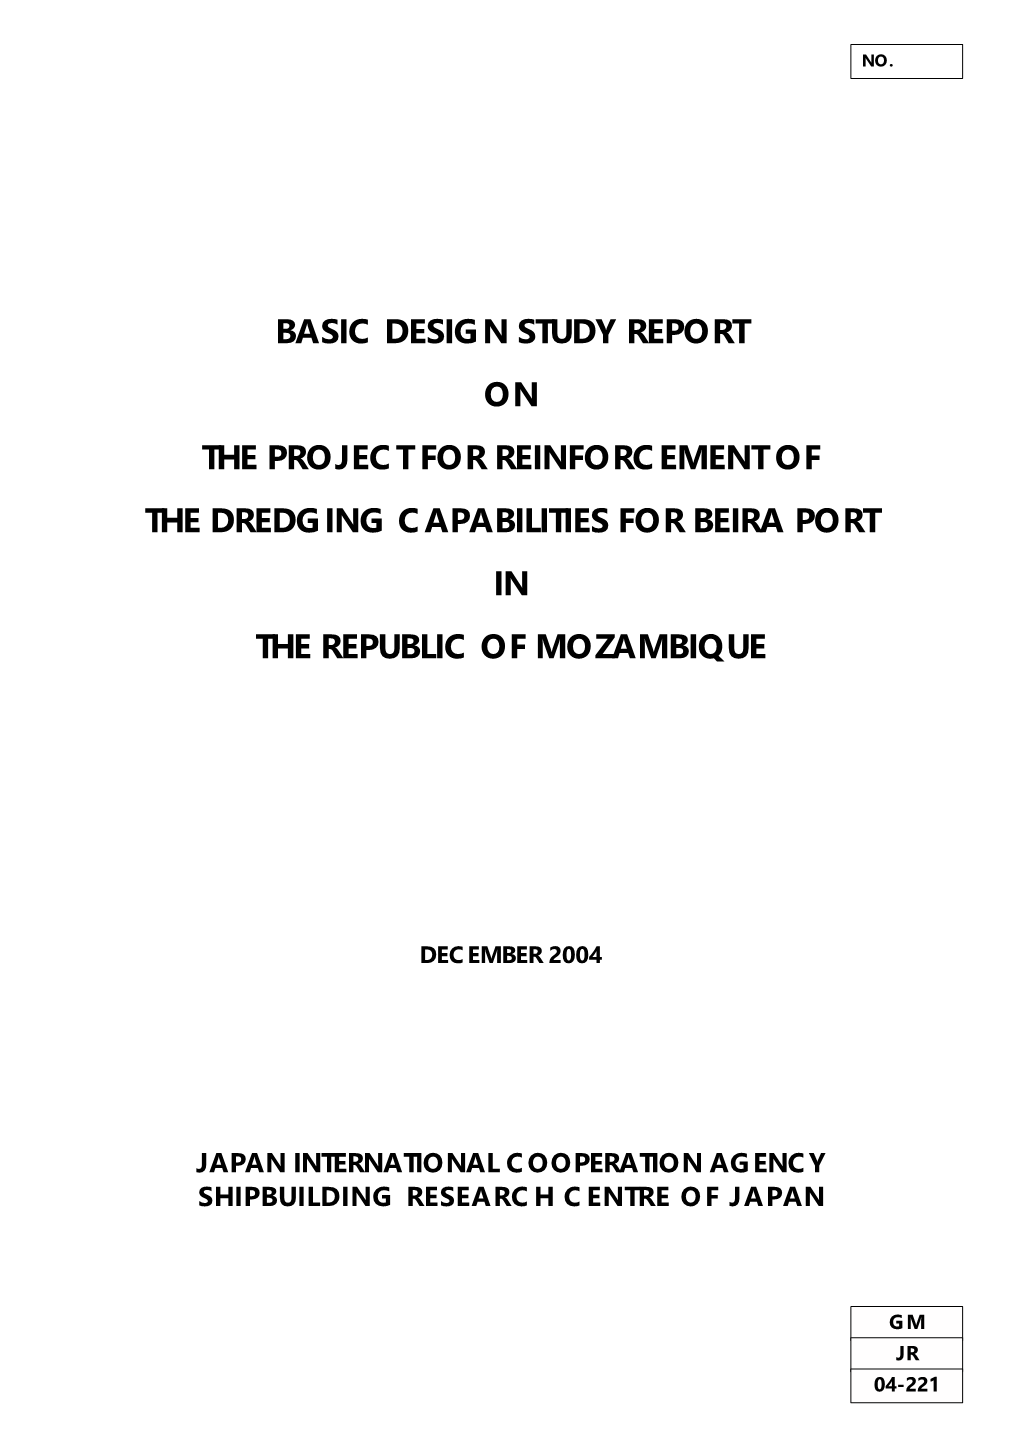 Basic Design Study Report on the Project for Reinforcement of the Dredging Capabilities for Beira Port in the Republic of Mozambique